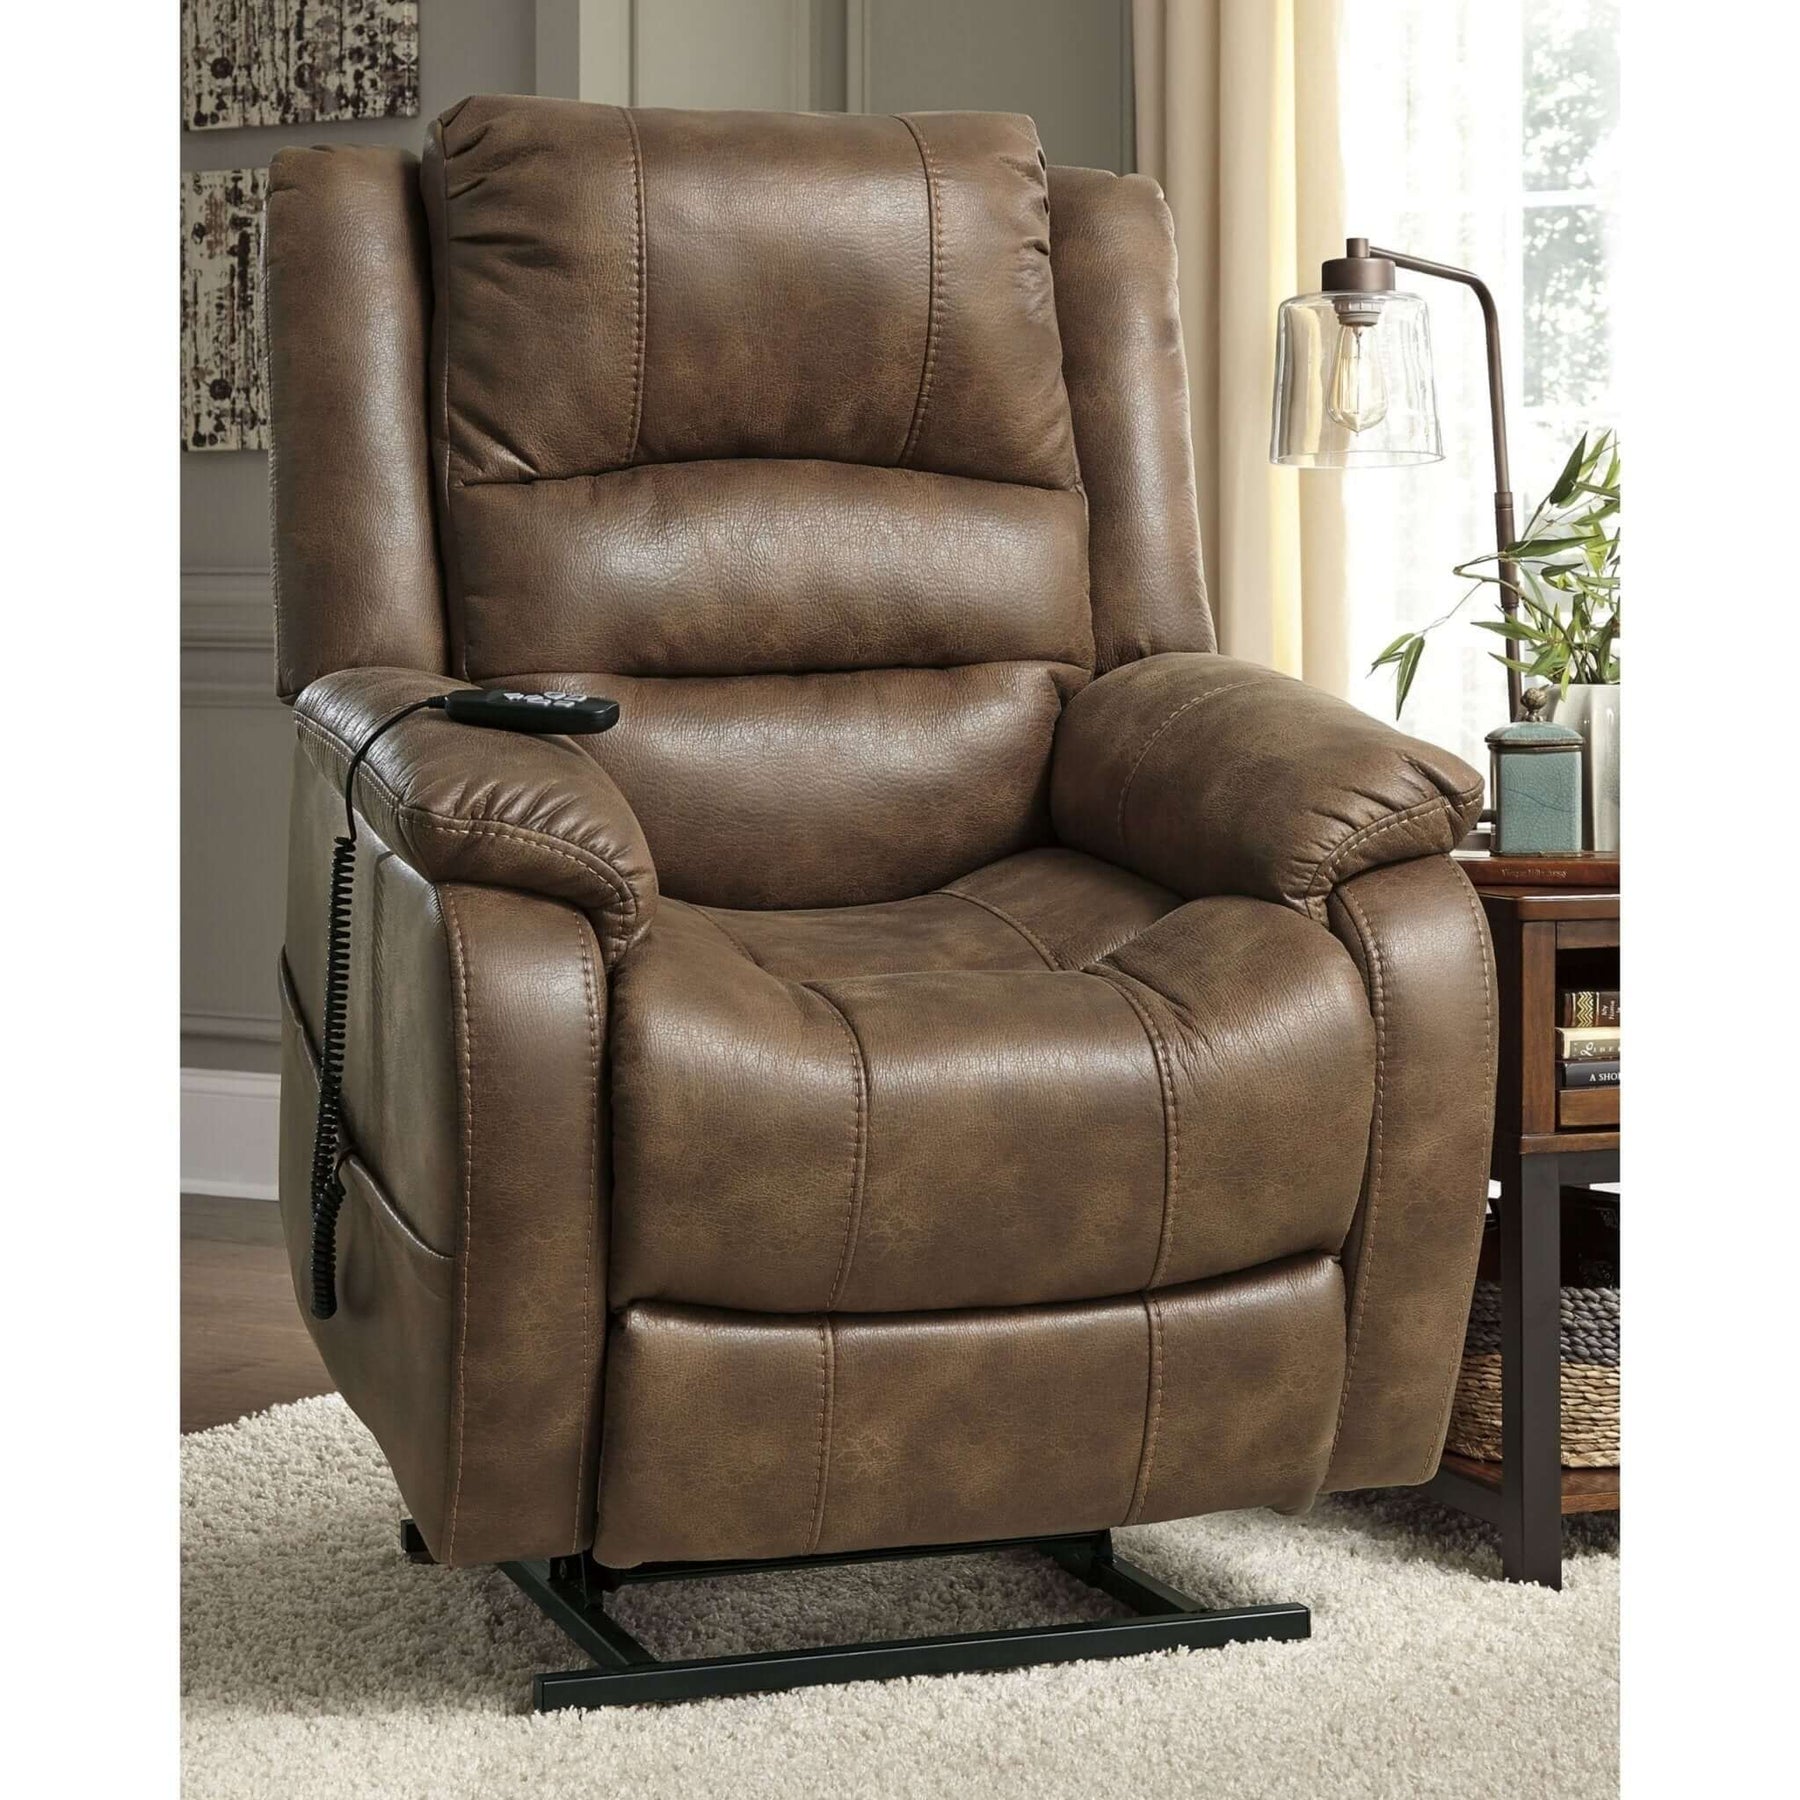 Lift Chair Buying Guide 2022 | Sleep Galleria